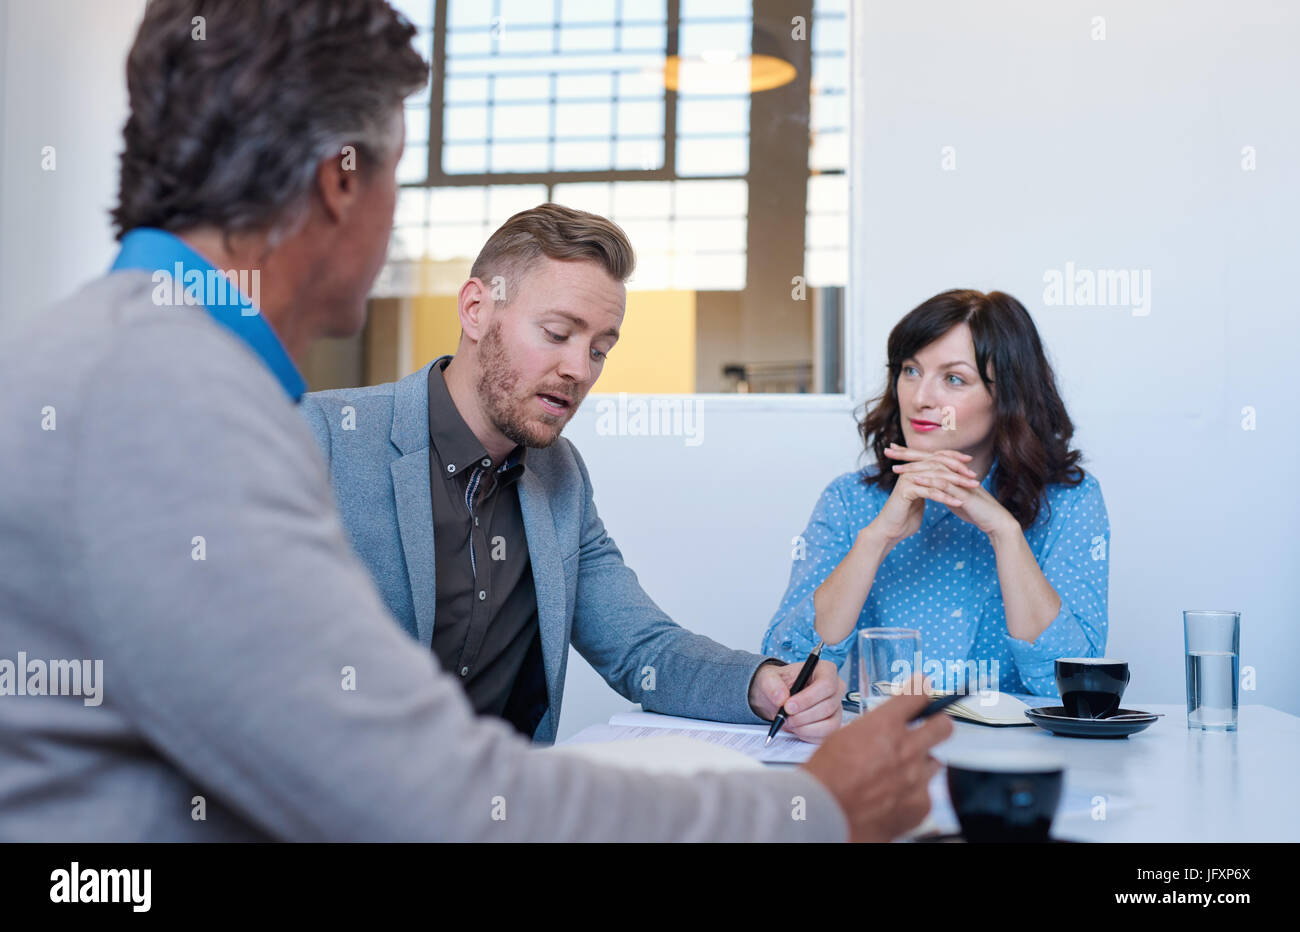 Three business colleagues having a meeting together in an office Stock Photo